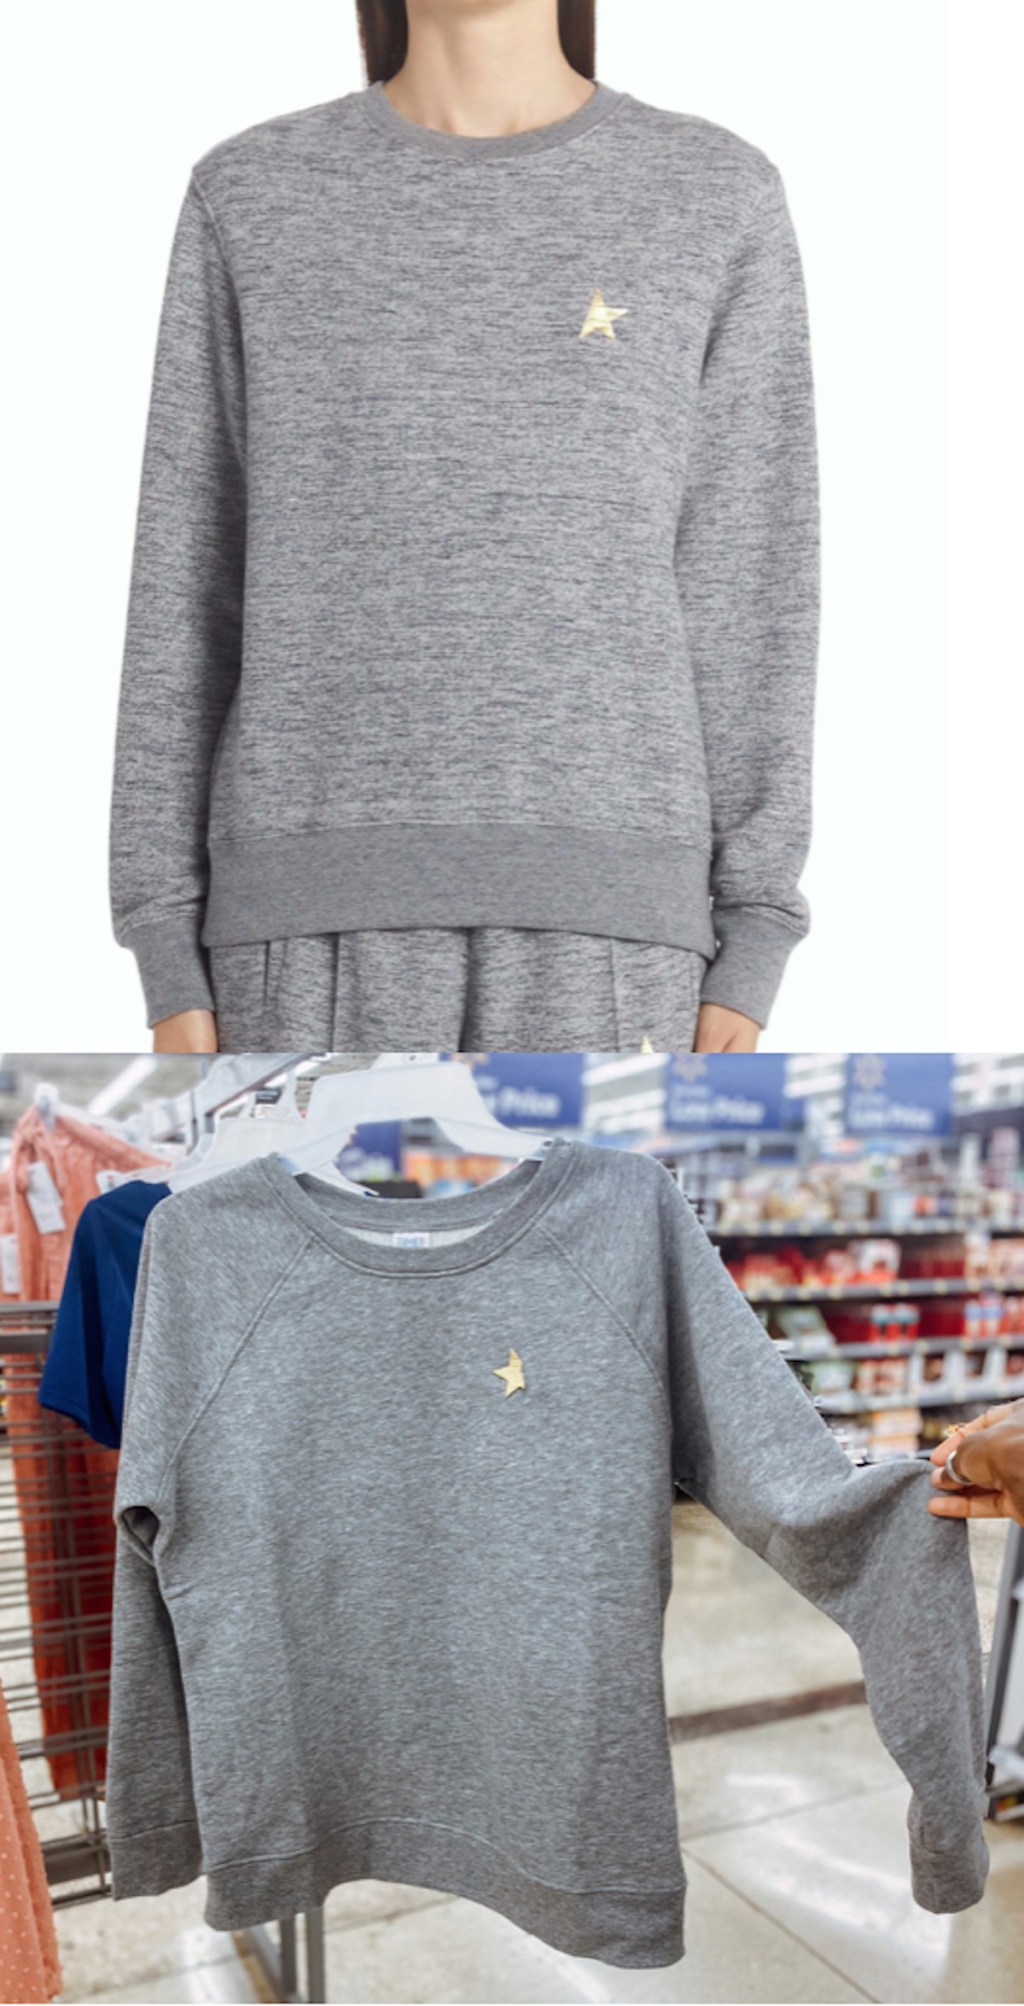 comparison of gray sweatshirt with gold star on front